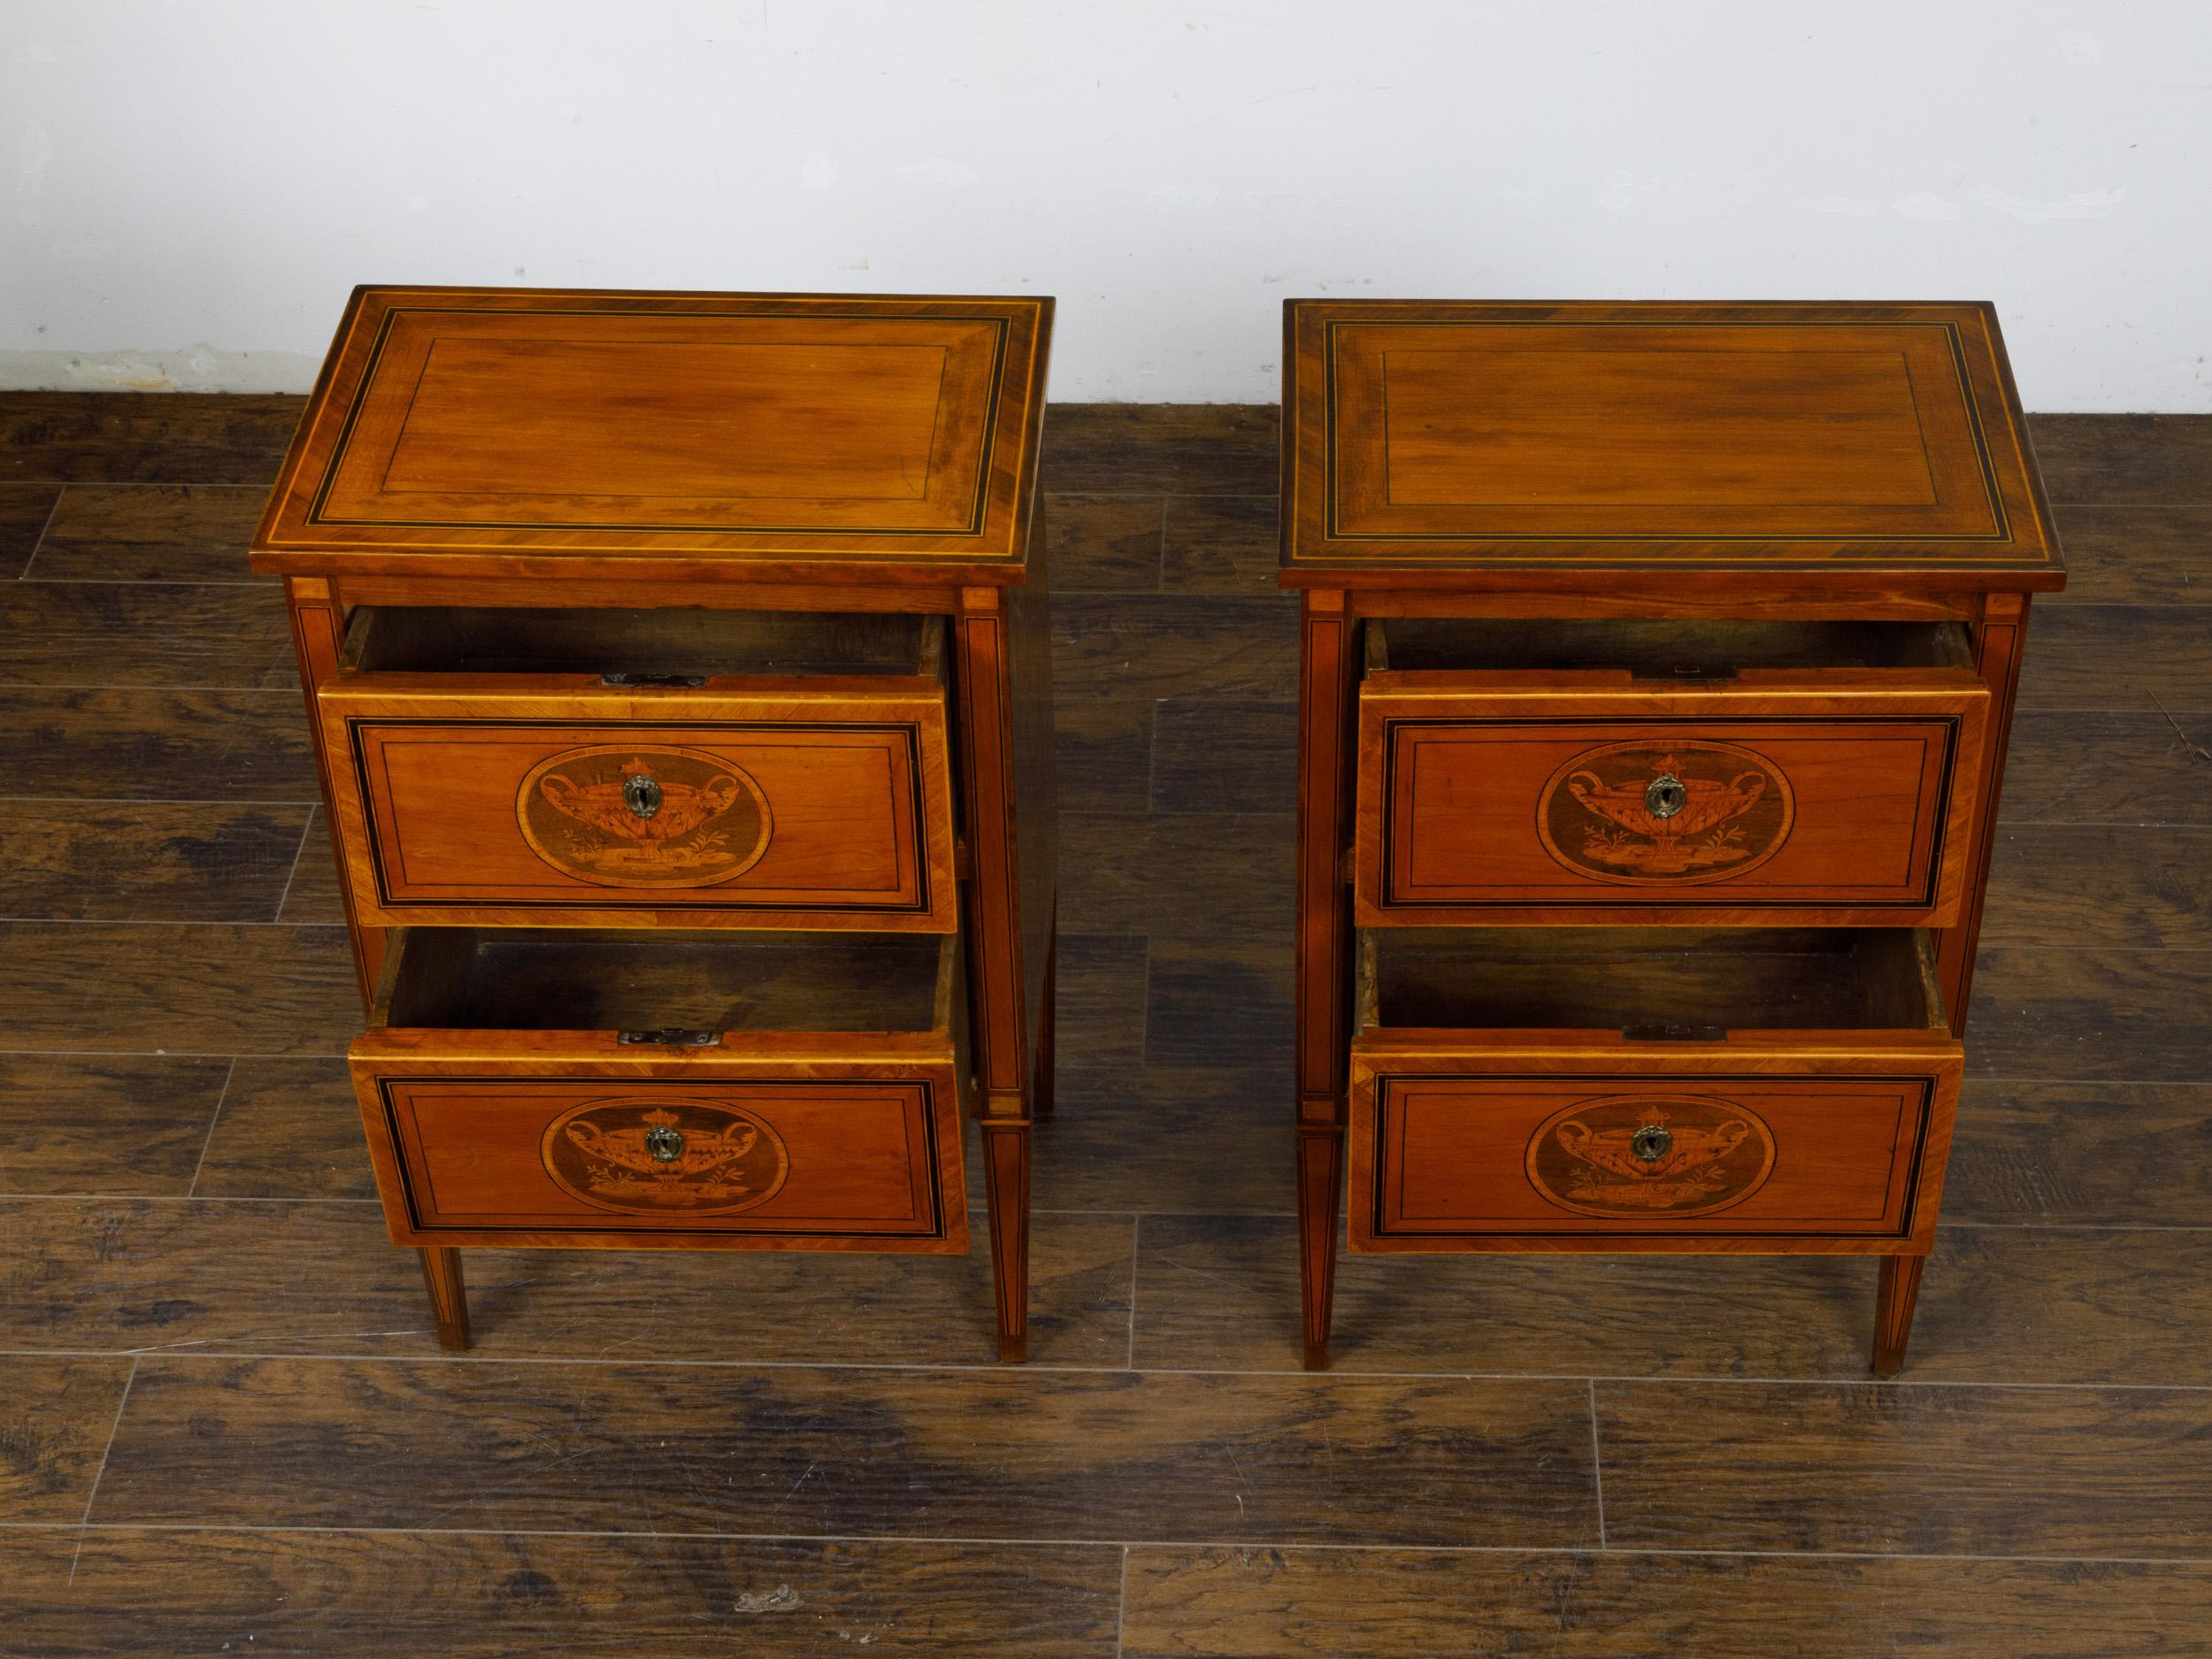 Pair of Italian Neoclassical 1800s Walnut Bedside Tables with Marquetry Décor For Sale 2